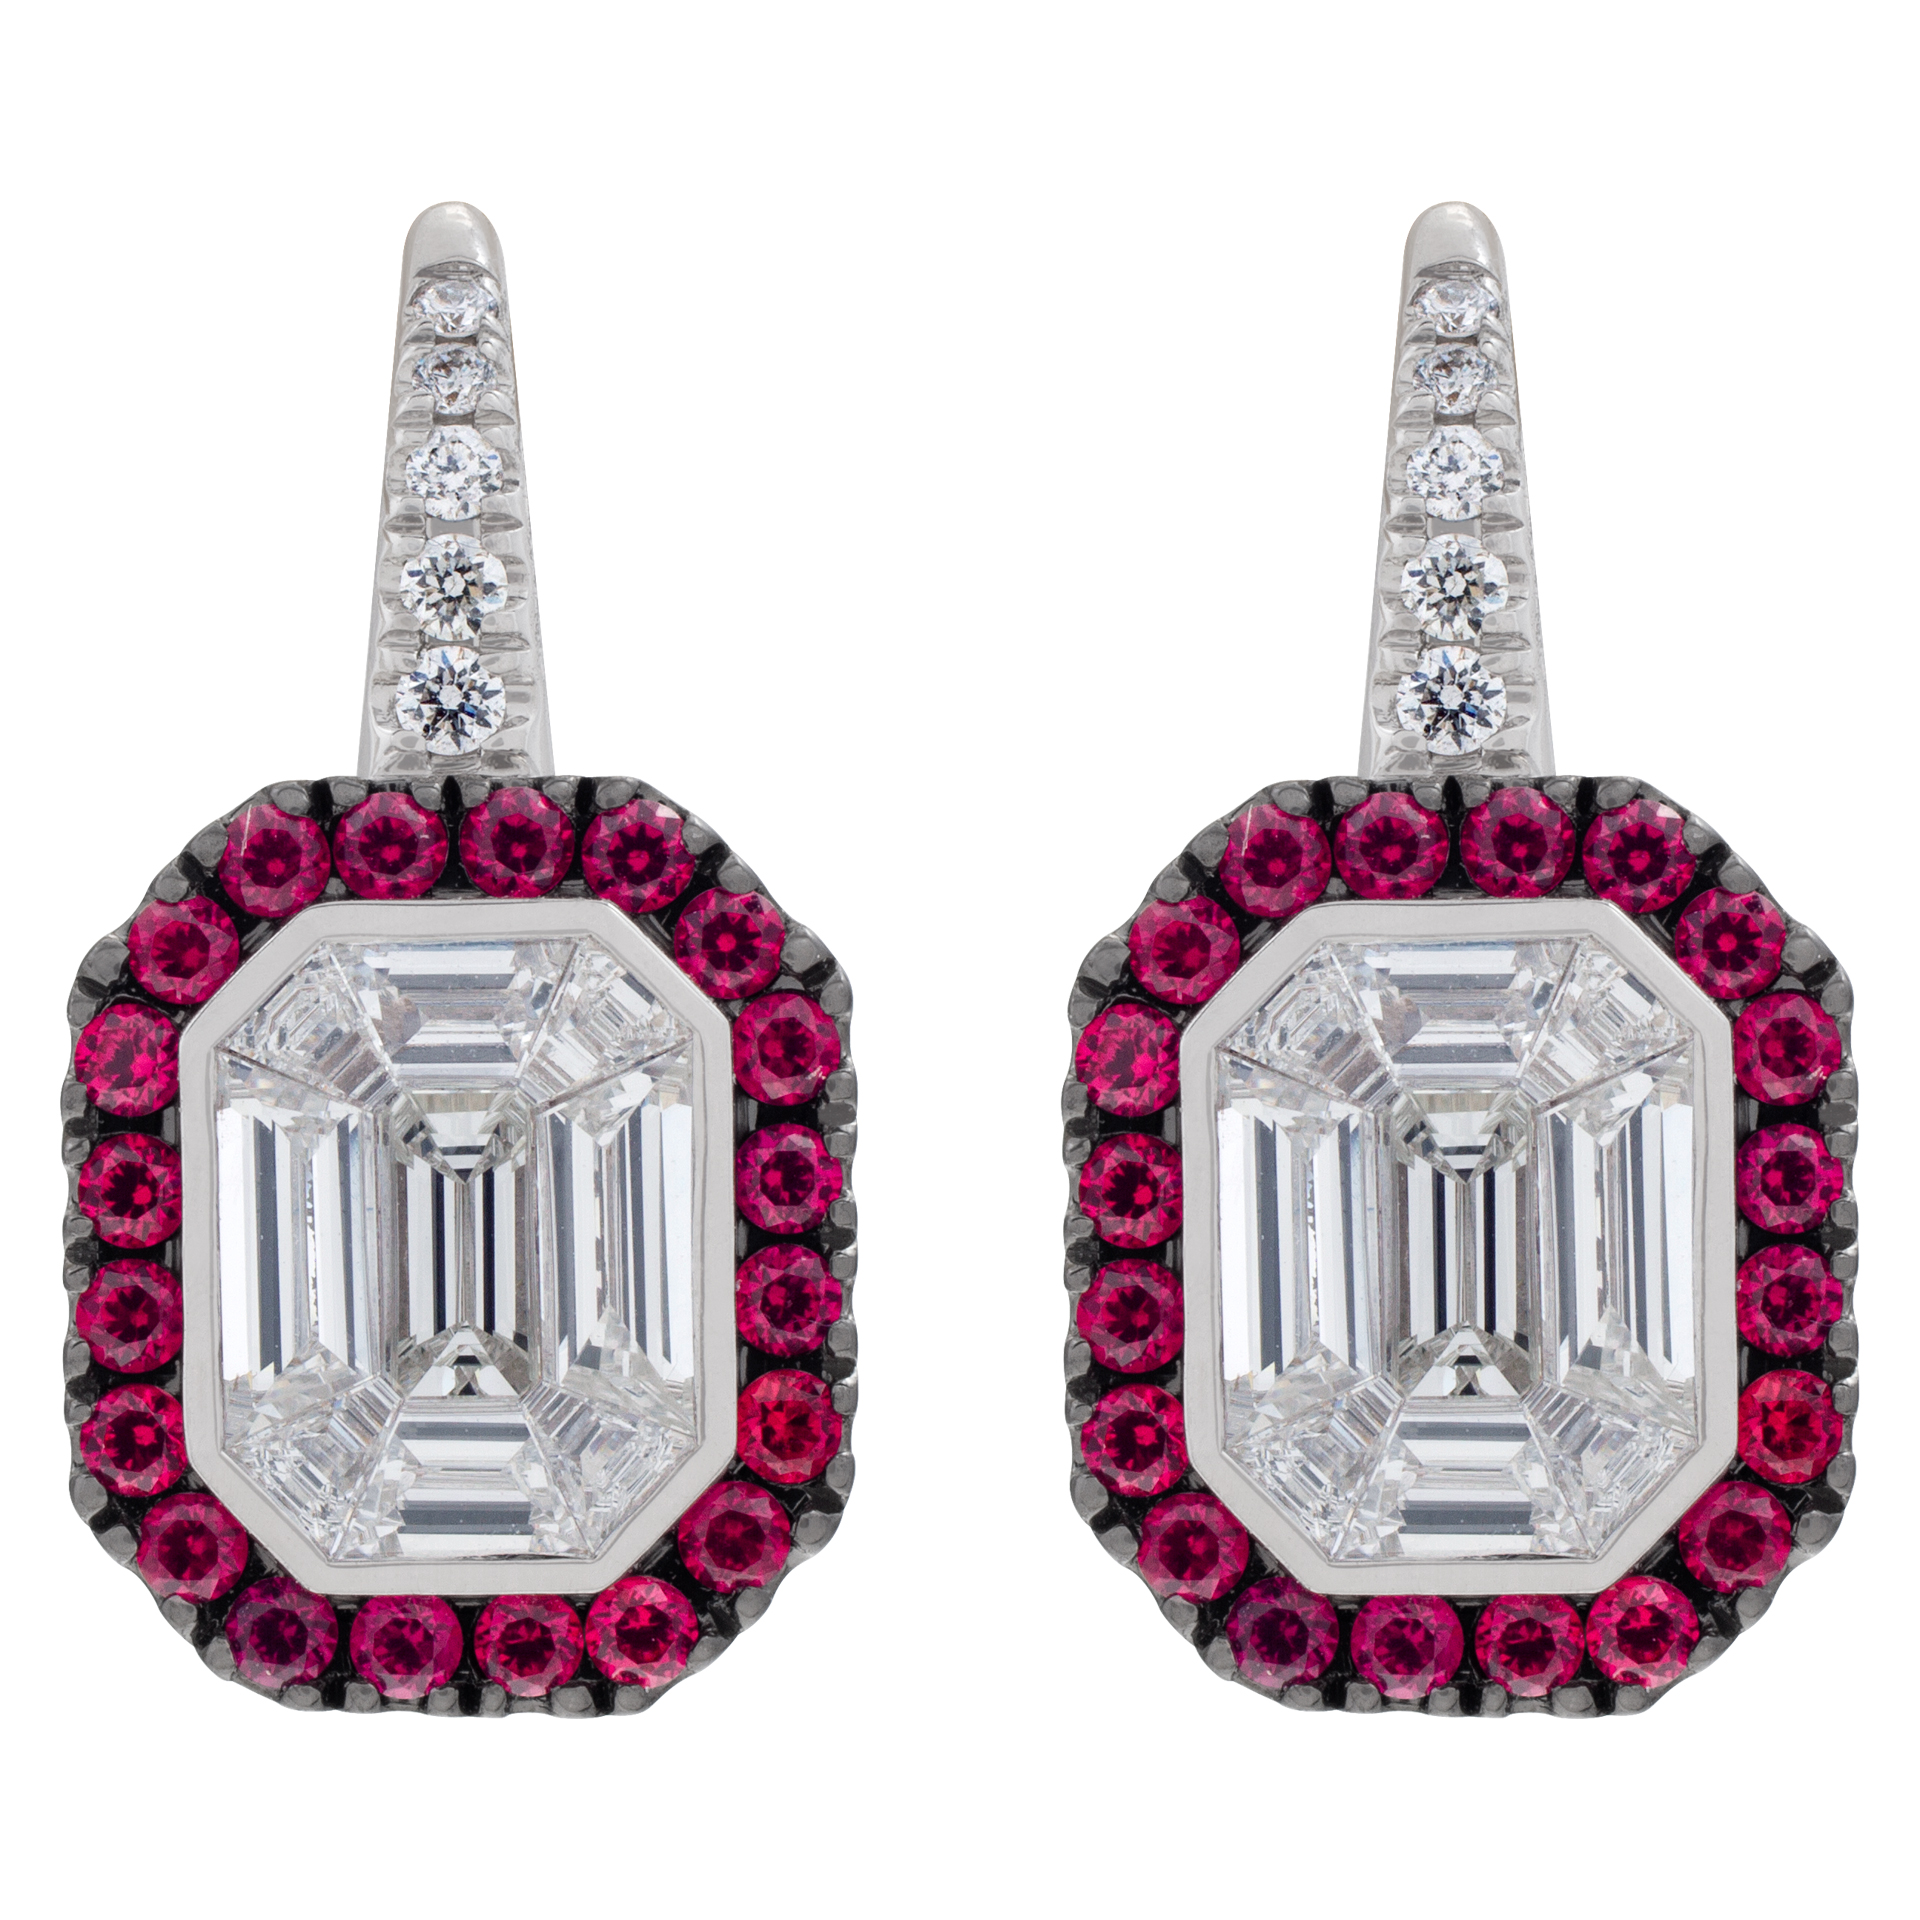 Diamond and ruby earrings in 18k white gold (Stones)